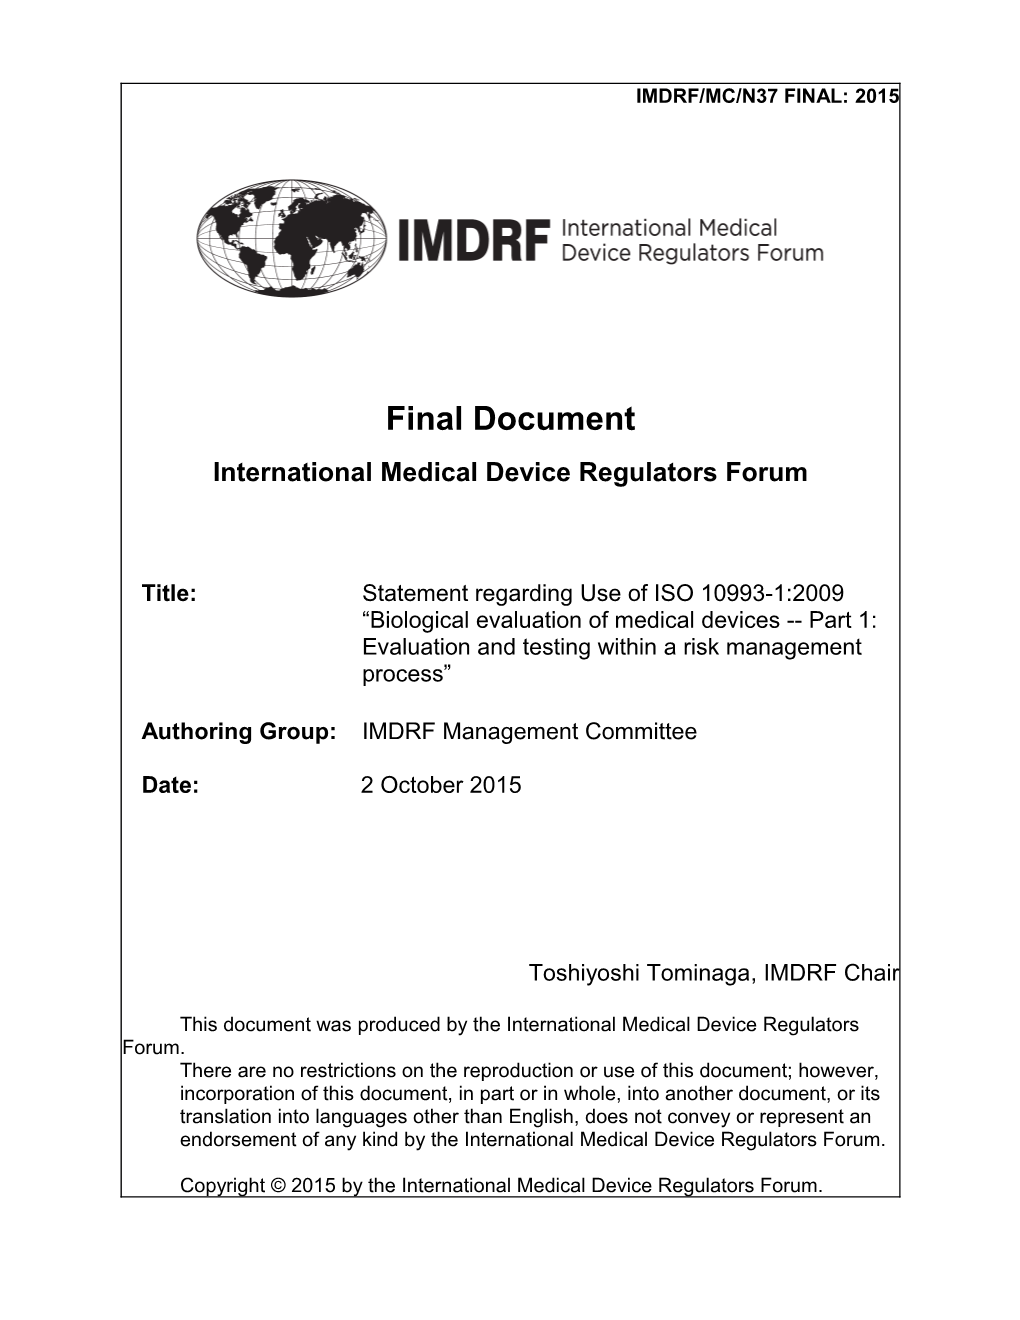 Statement Regarding Use of ISO 10993-1:2009 Biological Evaluation of Medical Devices Part